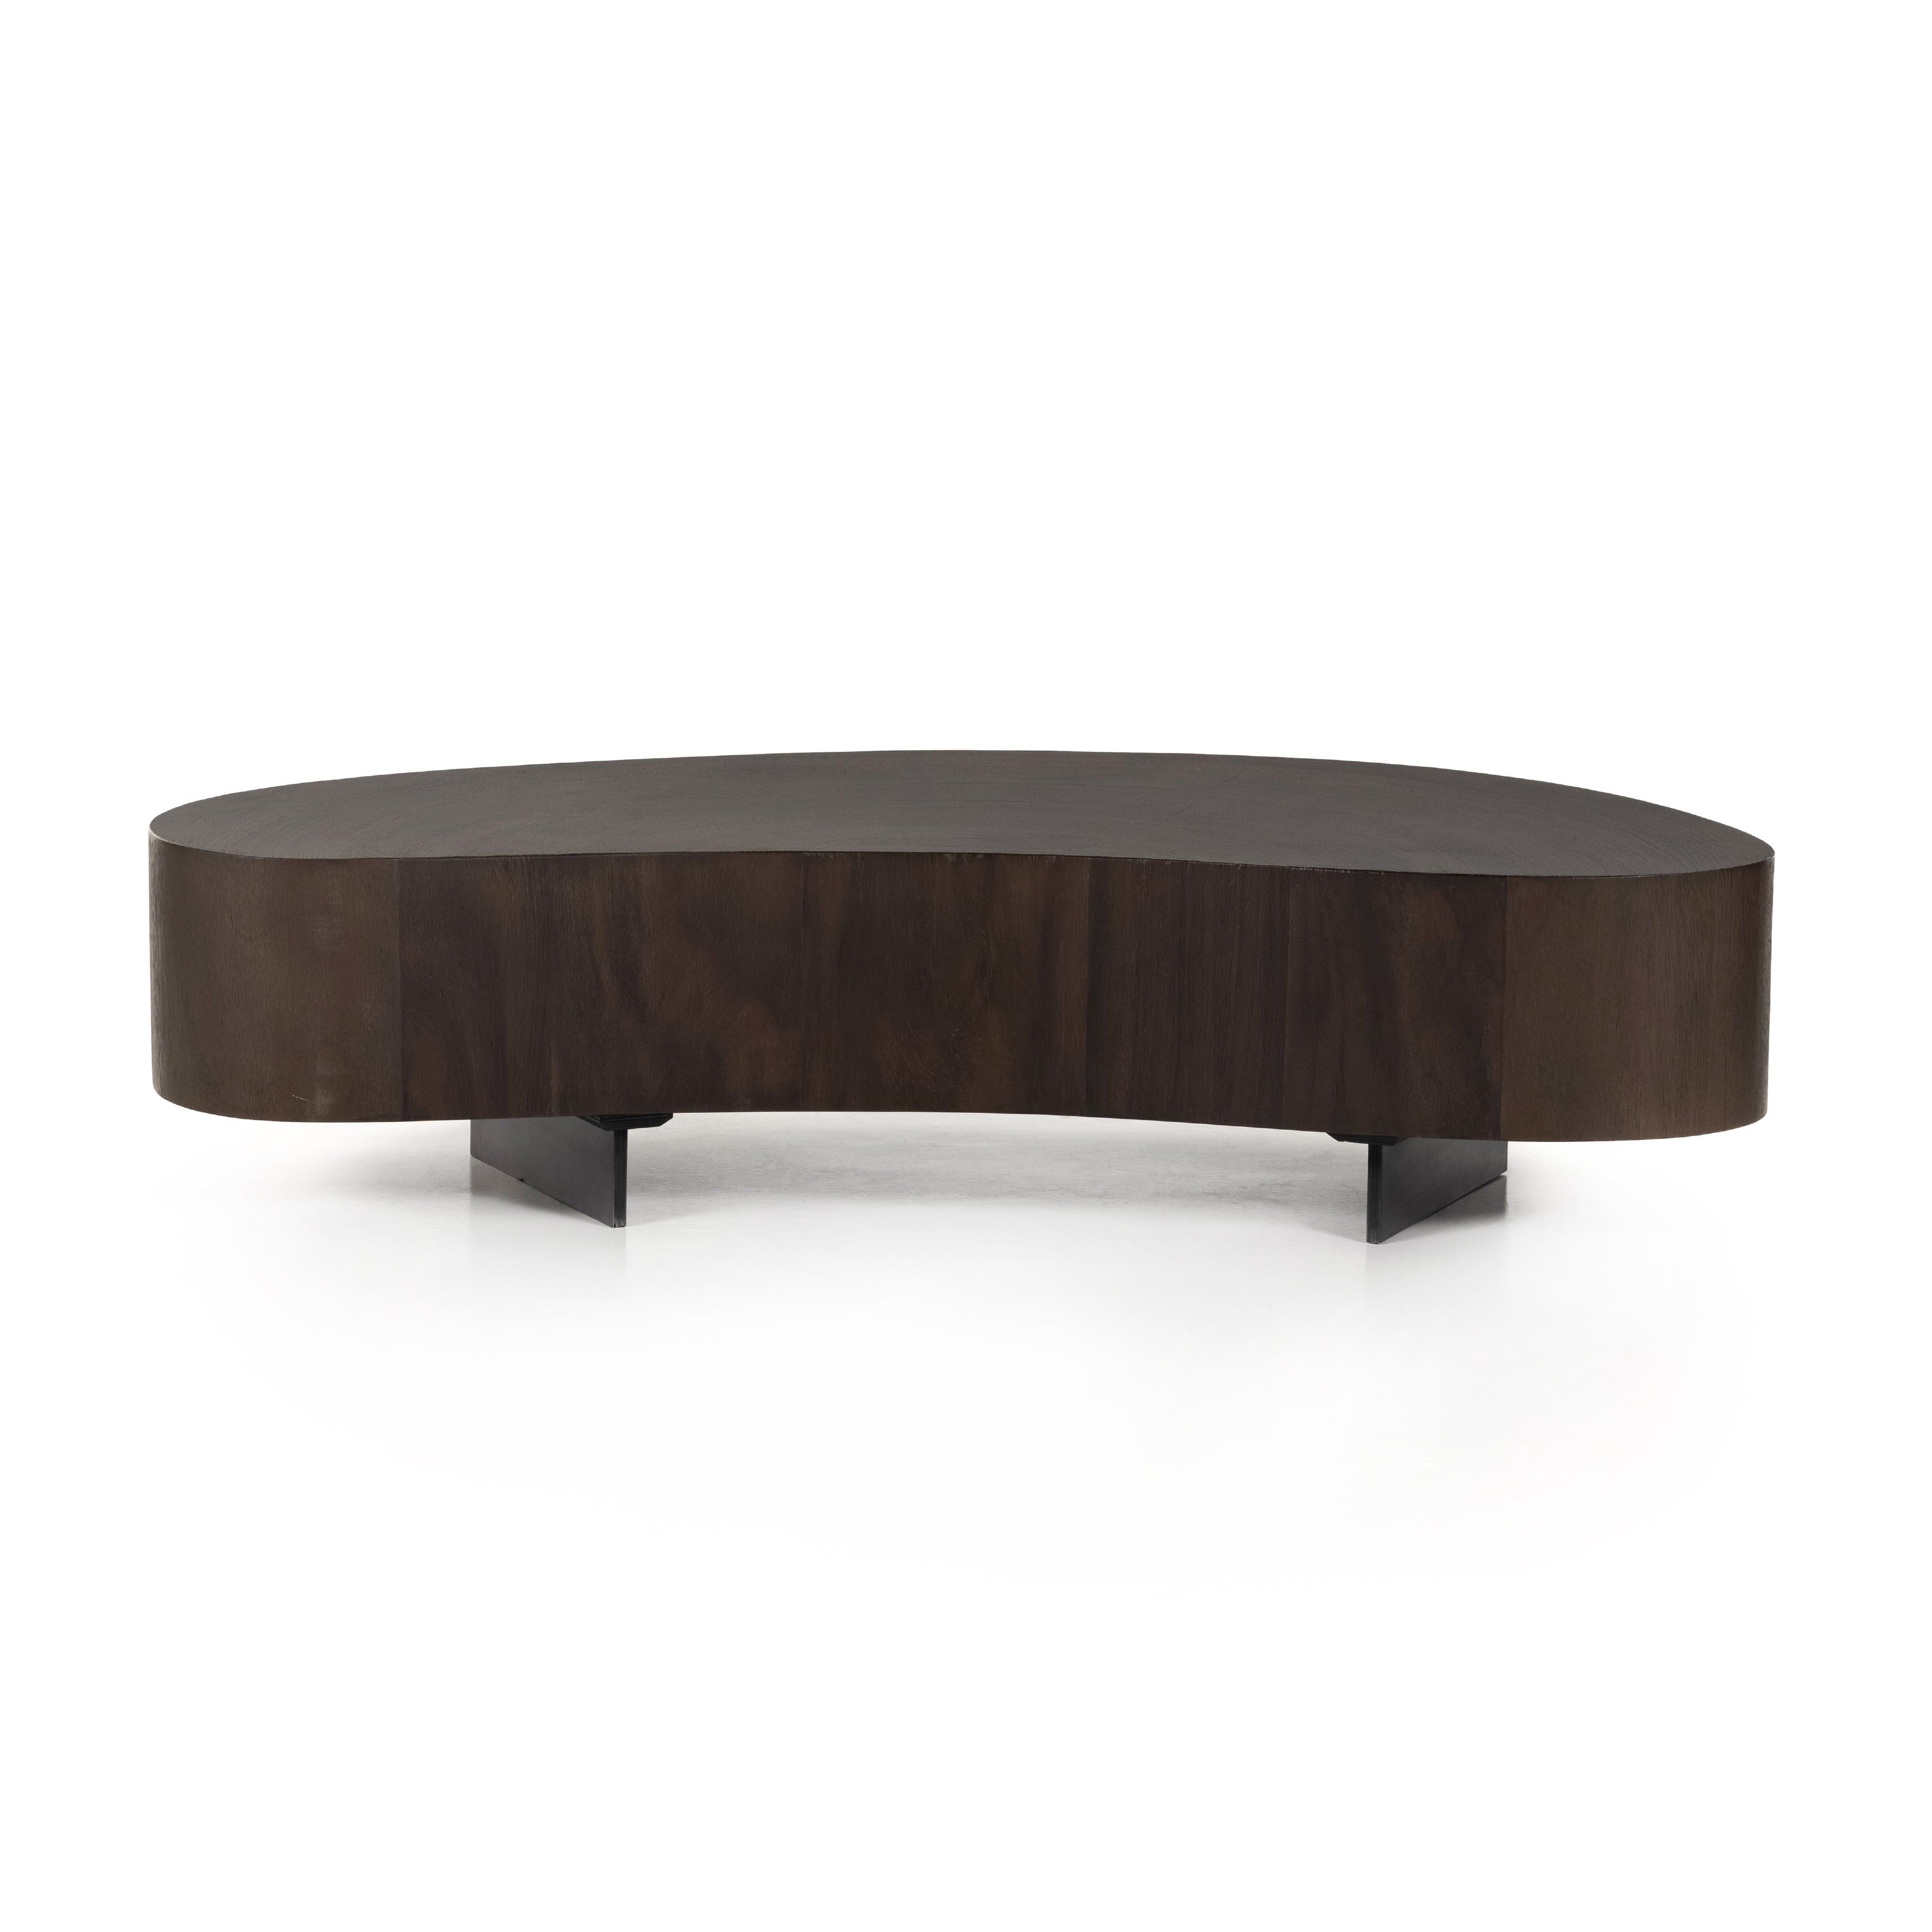 Natural beauty, total novelty. Oyster-cut Guanacaste forms a petite, kidney-shaped coffee table. Visible rings speak to woods' natural graining, while a dark gunmetal-finished base provides clean contrast to the whole look. Option to pair with taller piece, sold separately. Amethyst Home provides interior design, new construction, custom furniture, and area rugs in the Des Moines metro area.